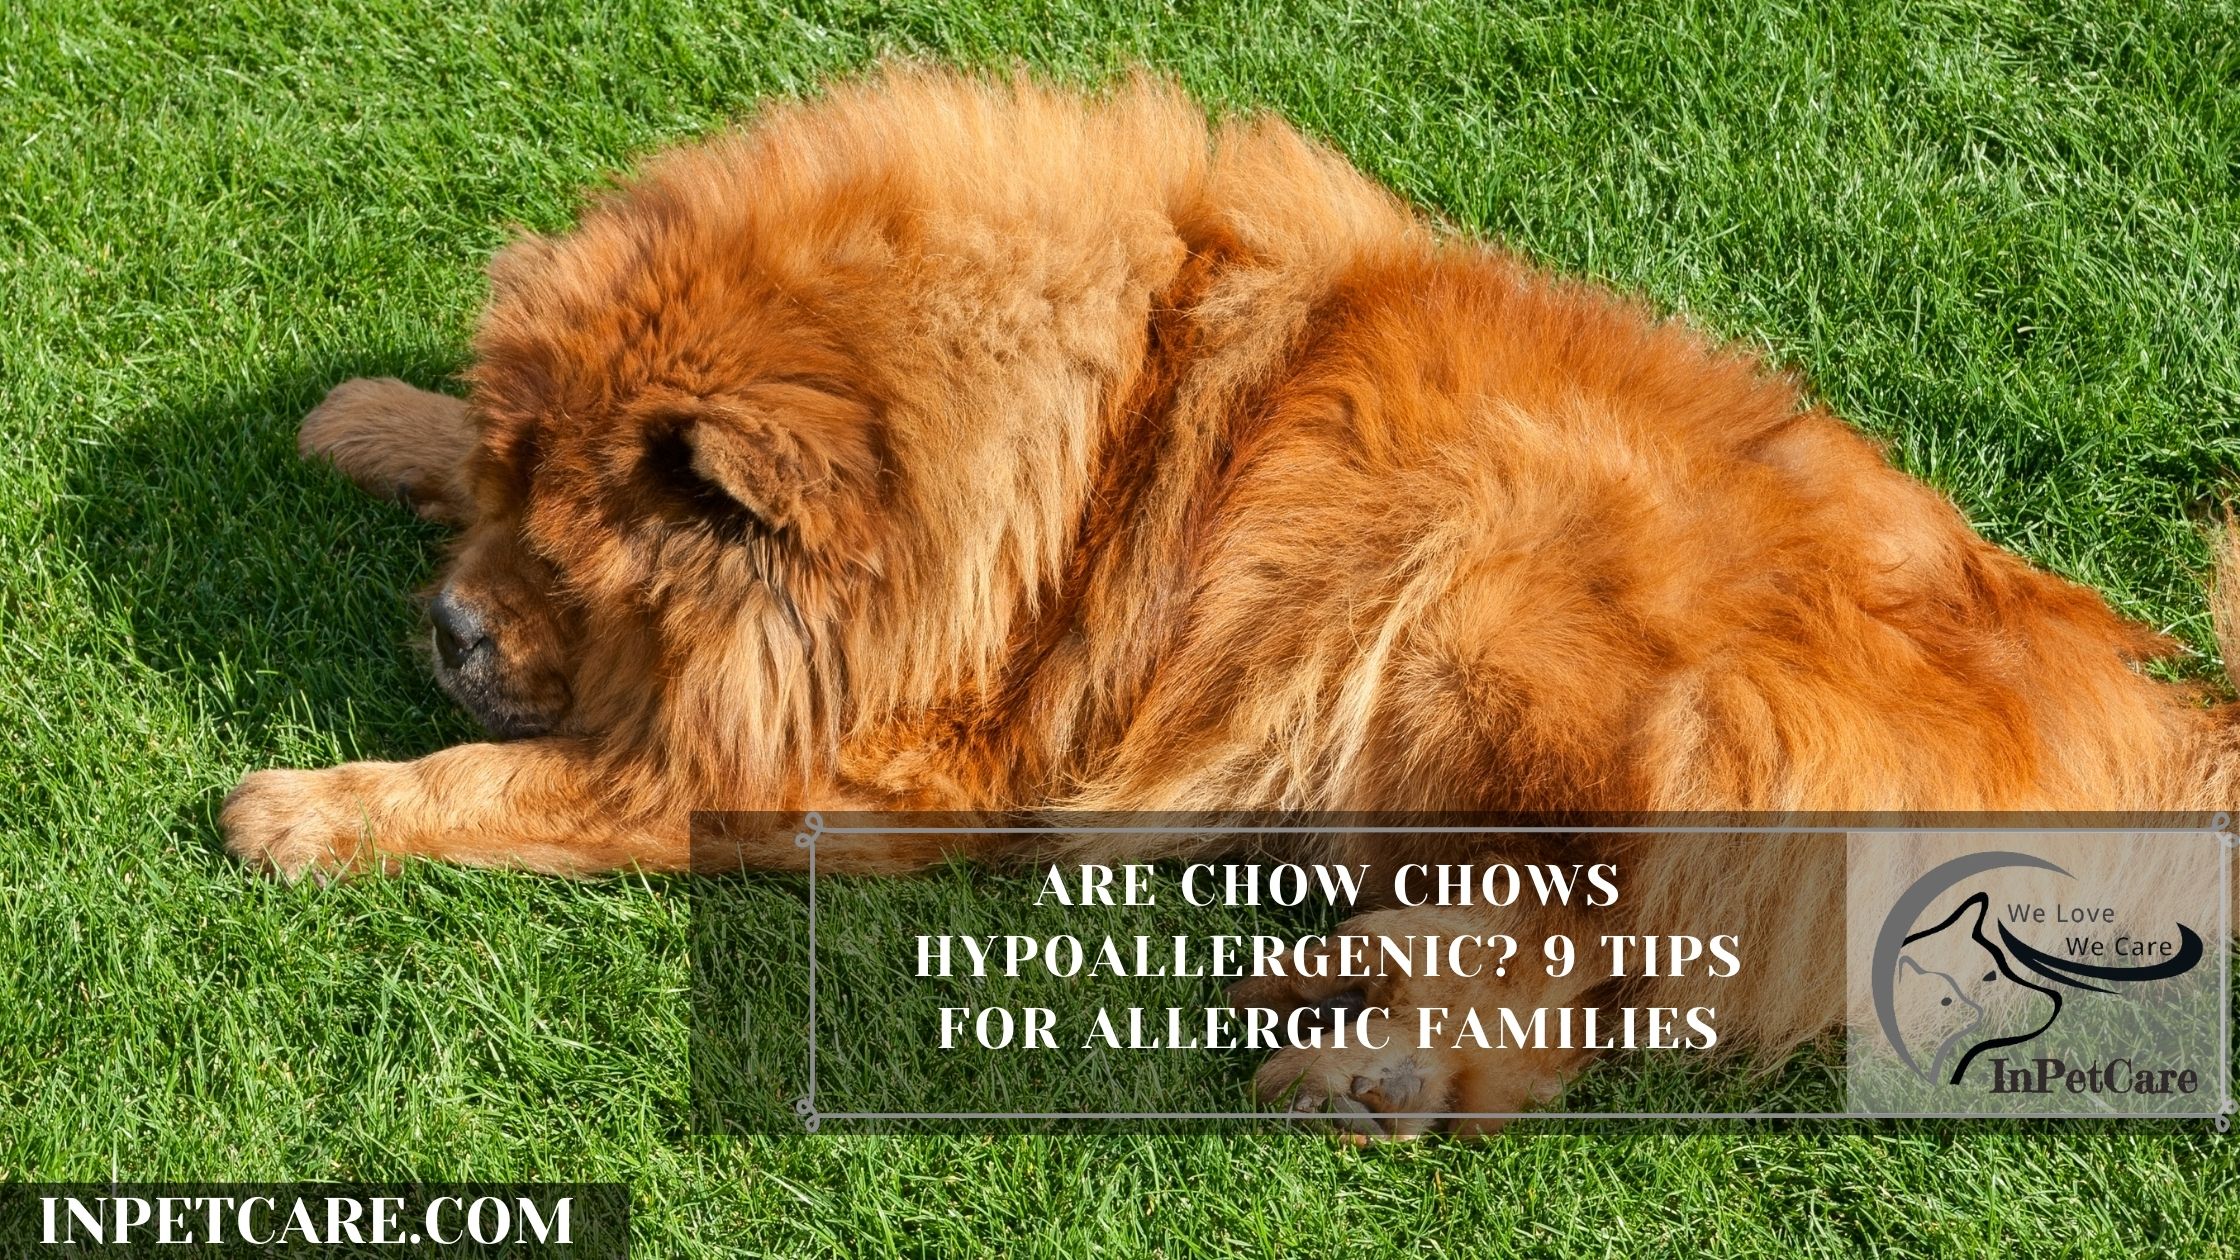 Are Chow Chows Hypoallergenic? 9 Tips For Allergic Families